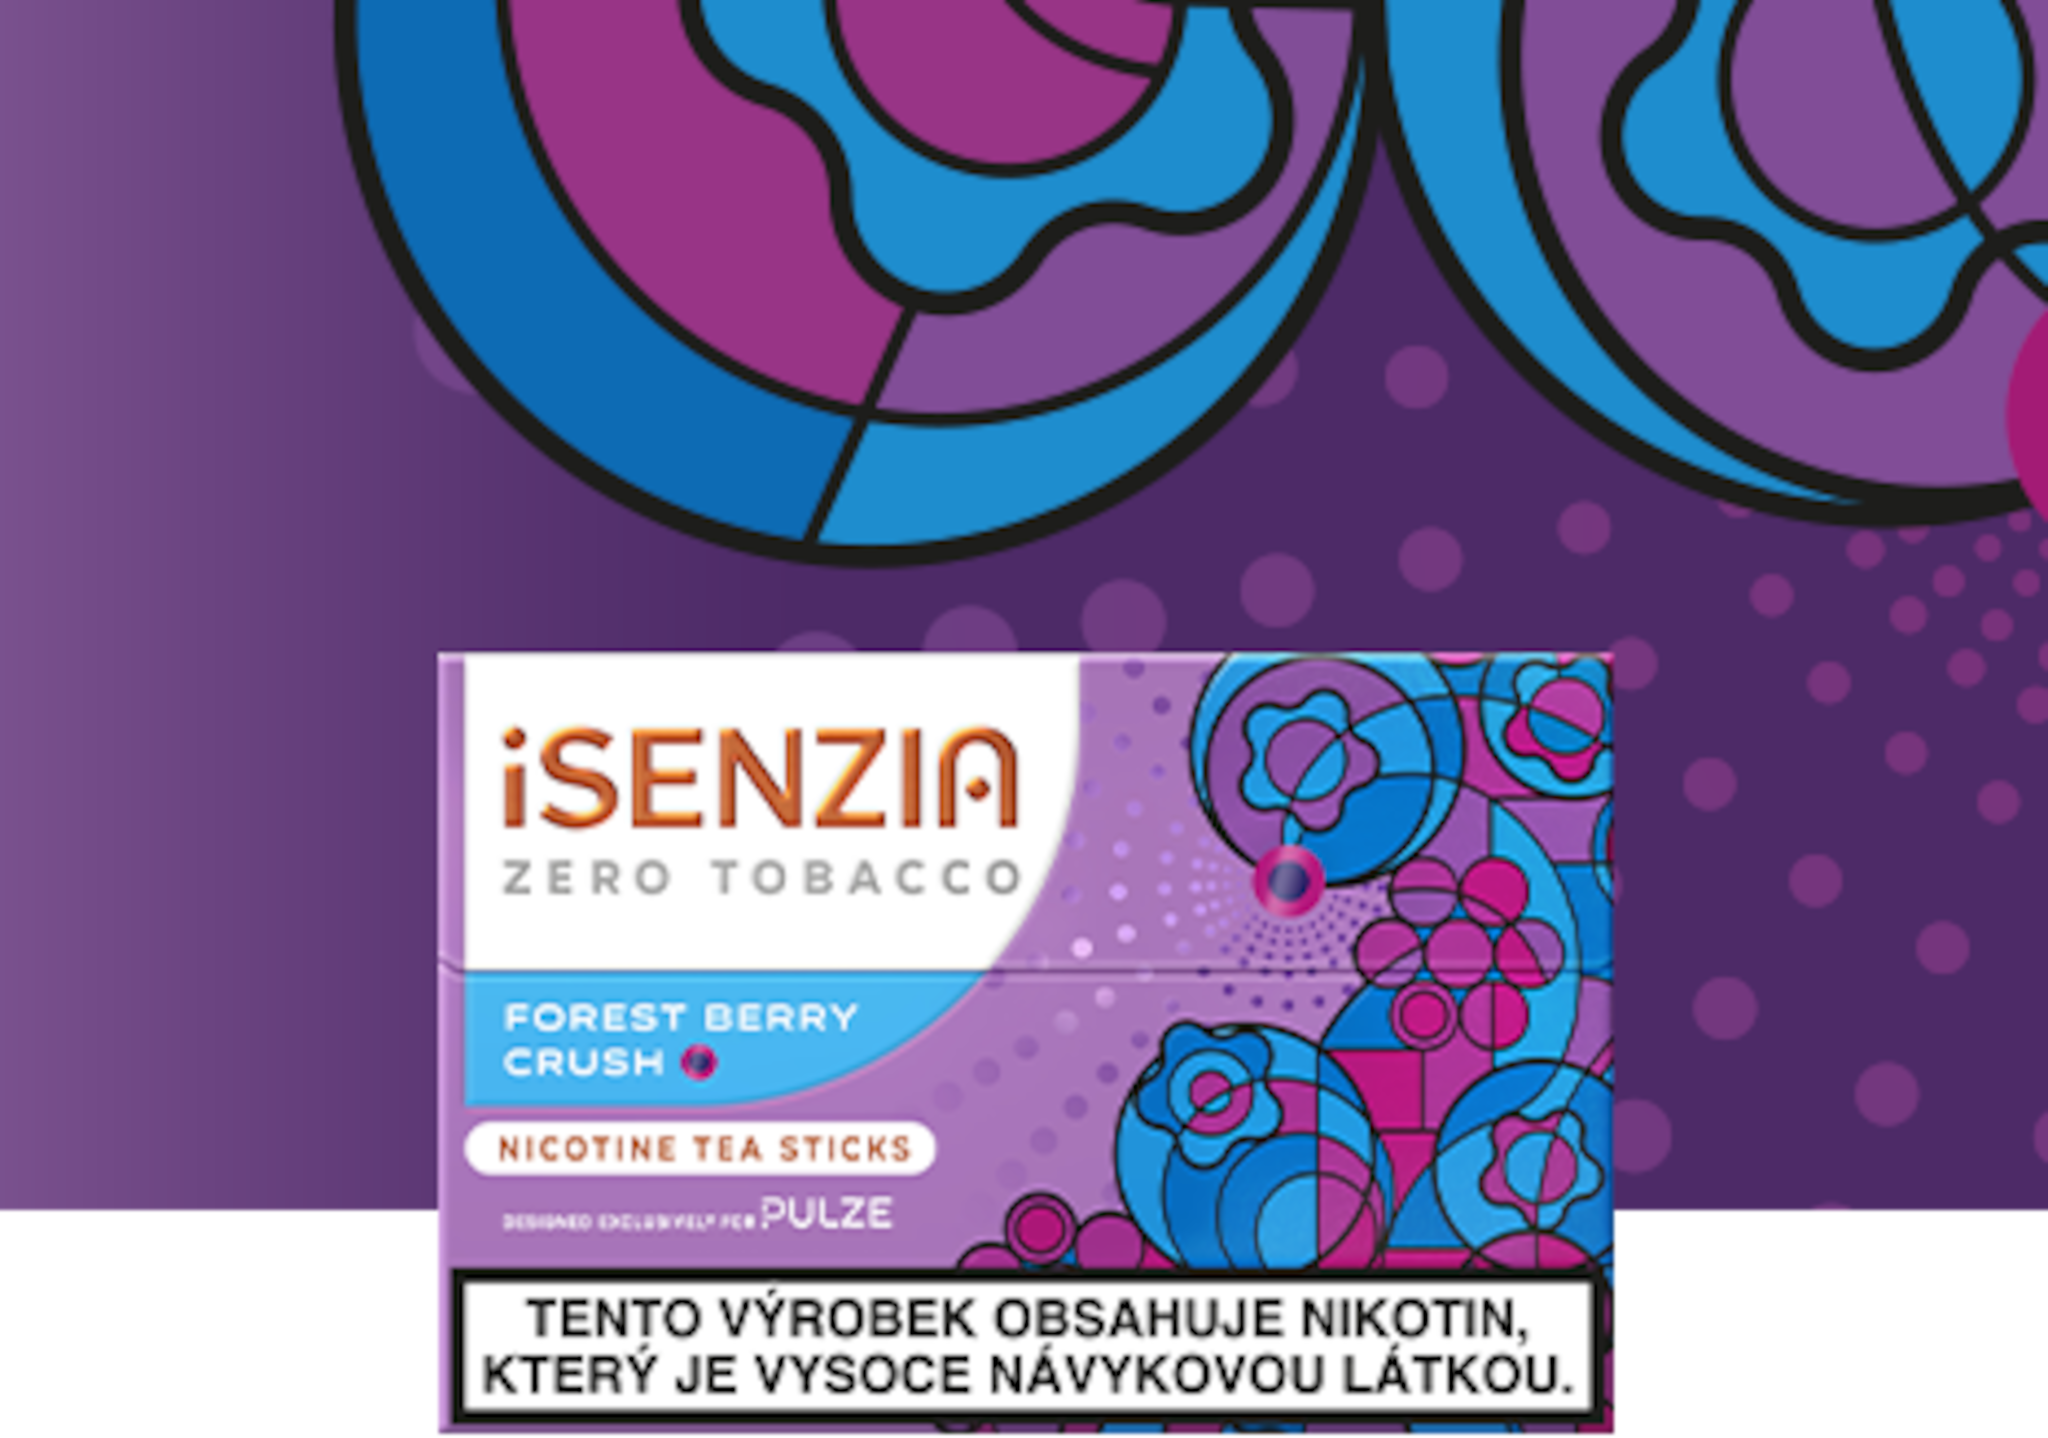 iSENZIA Forest Berry Crush - Filter